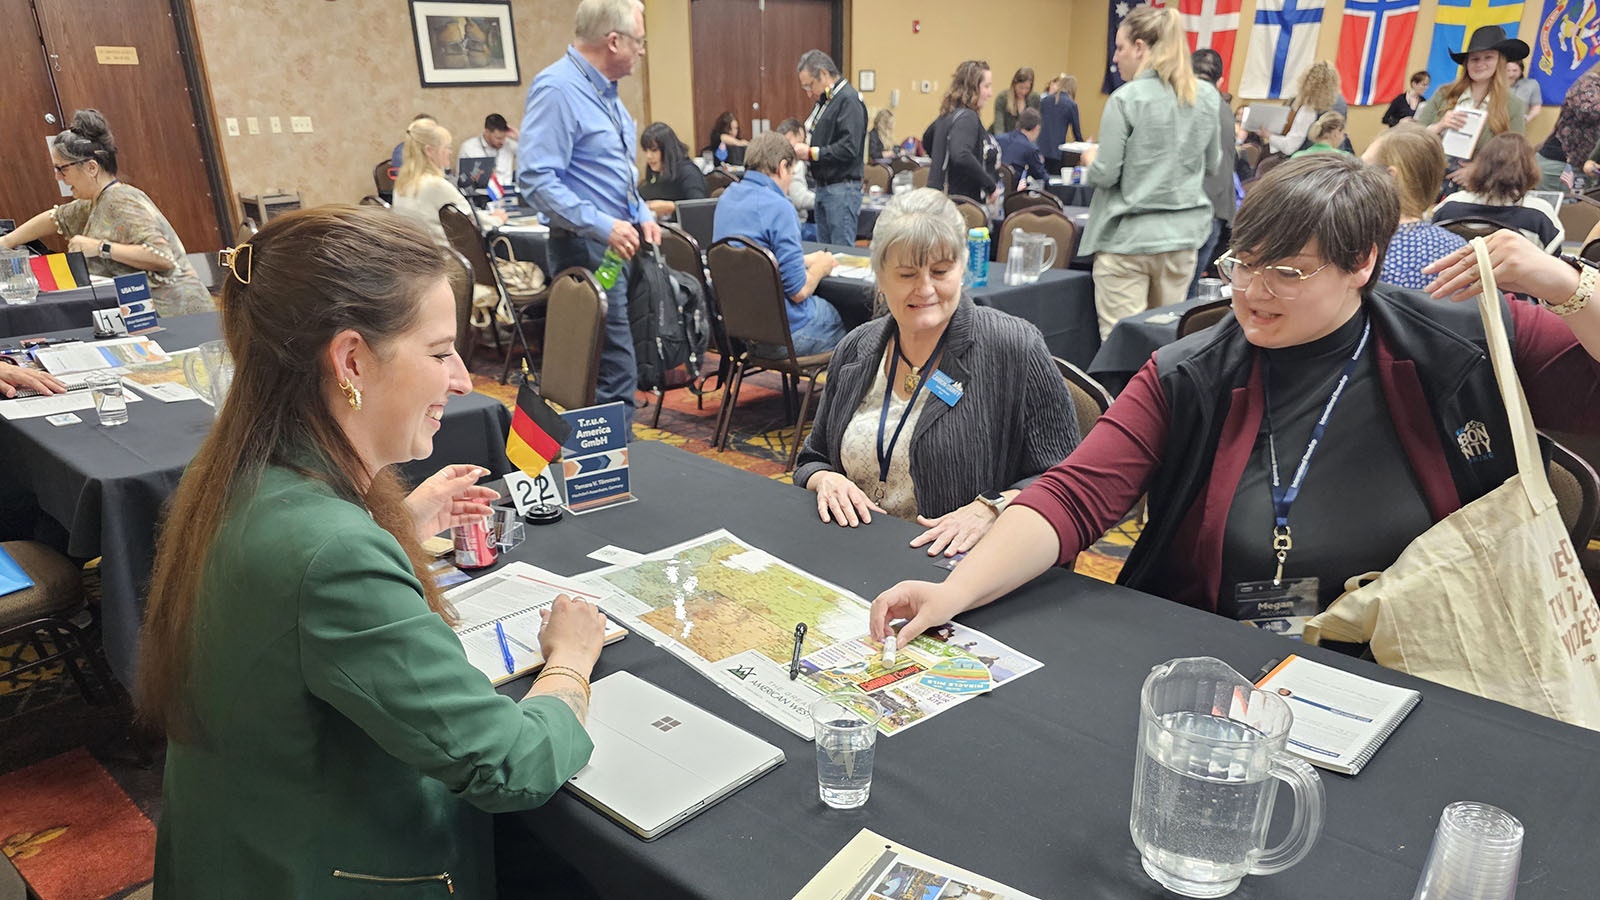 Visit Carbon County Sales and Marketing Coordinator Megan McComas, right. offers Tamara Tommers with German-based TRUE America a chapstick before beginning her pitch on tourism opportunities in Carbon County, while Visit Carbon County CEO Leslie Jefferson looks on.